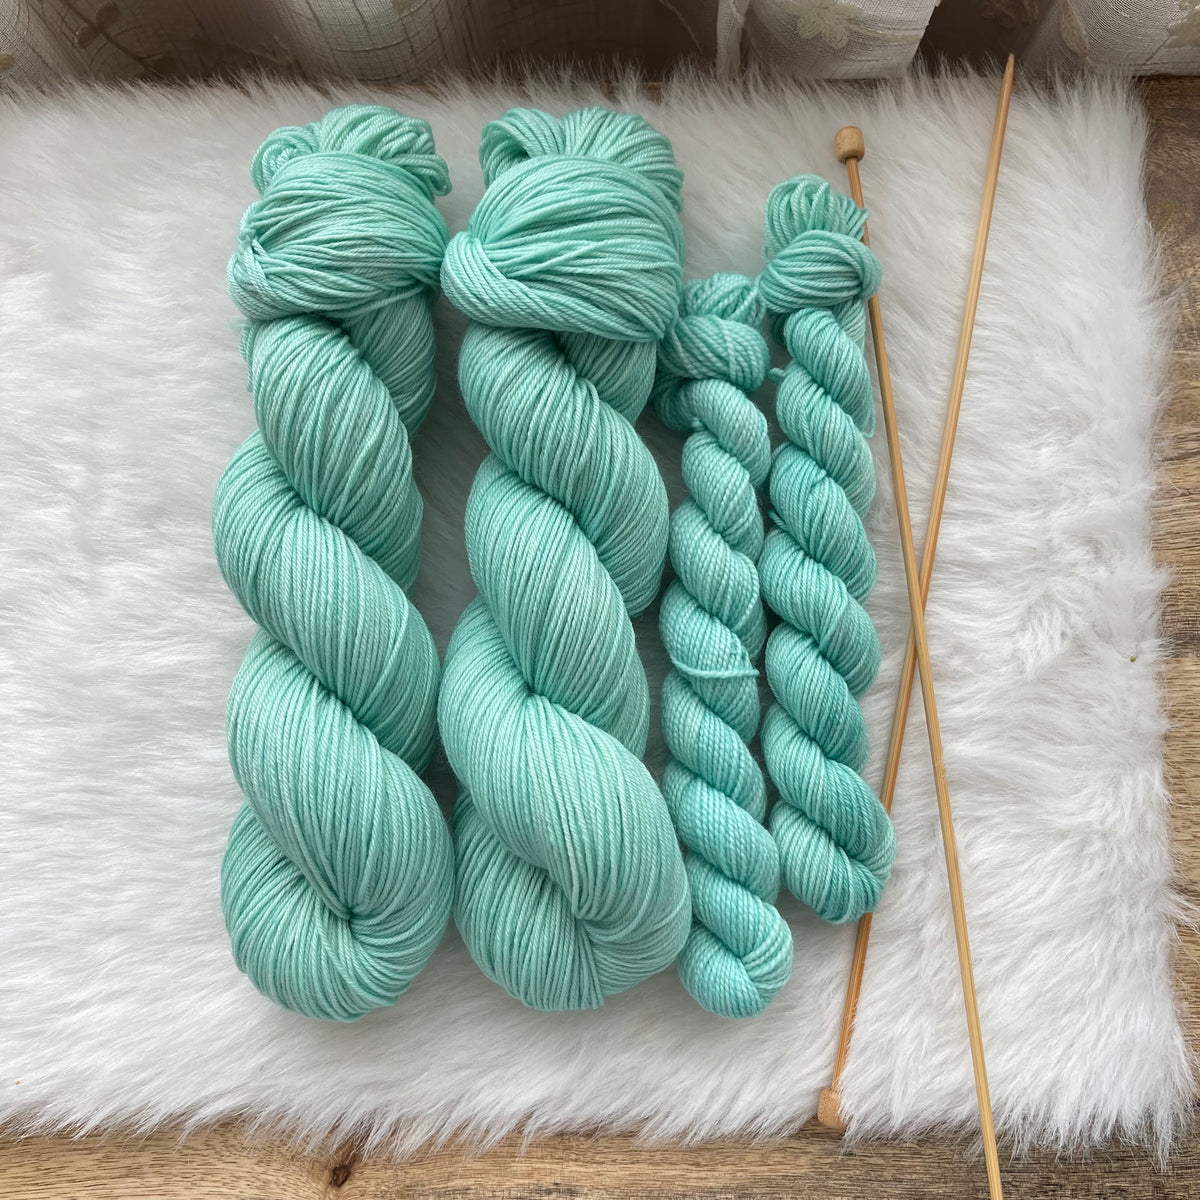 MARCH WINDS - Dyed to Order - Hand Dyed Yarn Skein